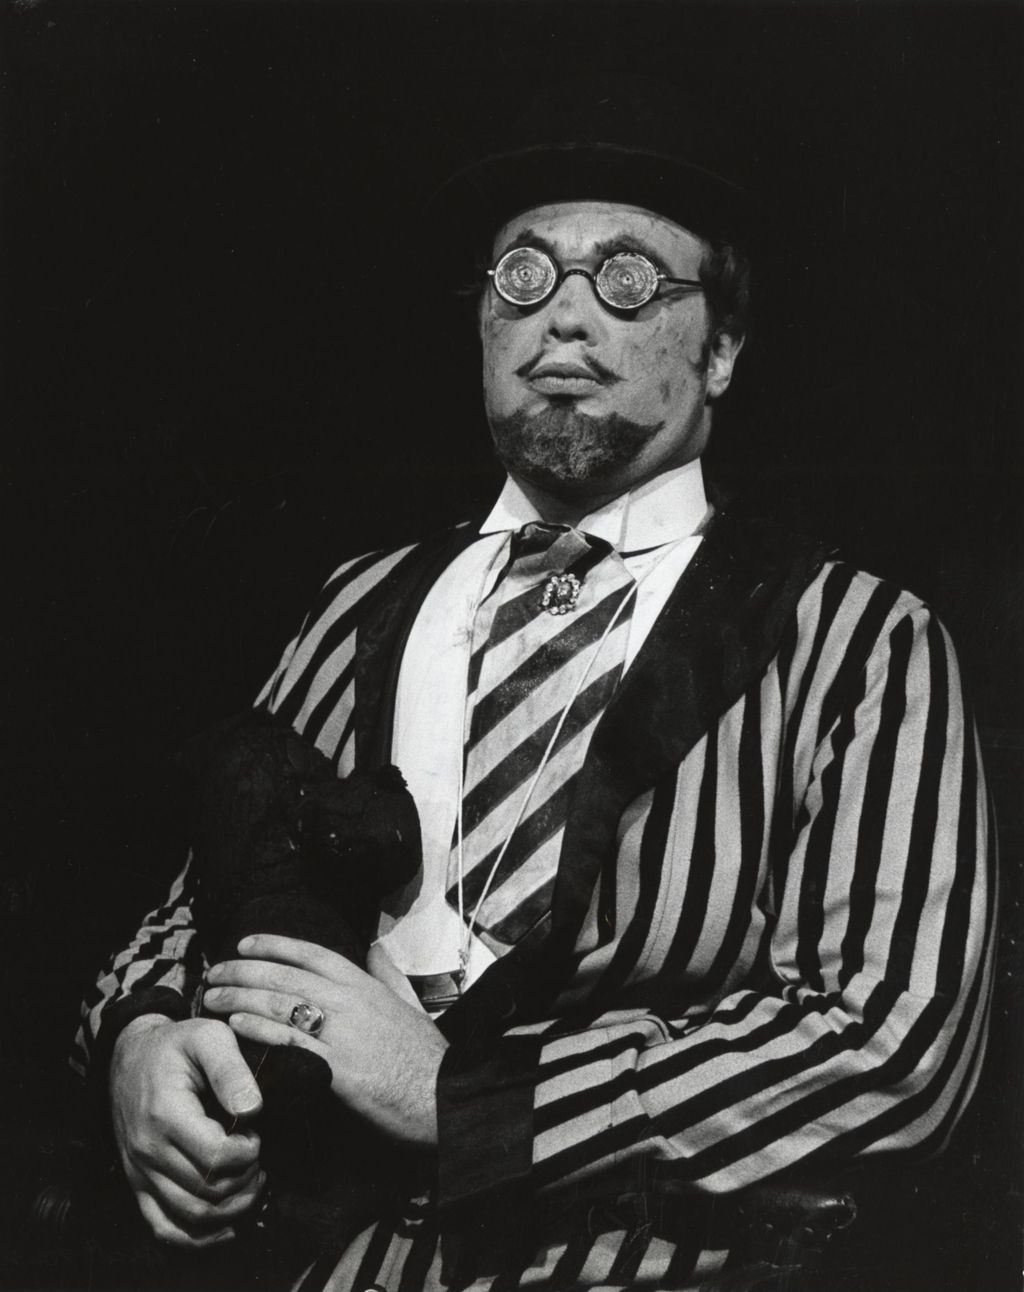 Miniature of Unidentified actor in loud striped suit on stage in a production of "The Threepenny Opera" at Hull-House Theater